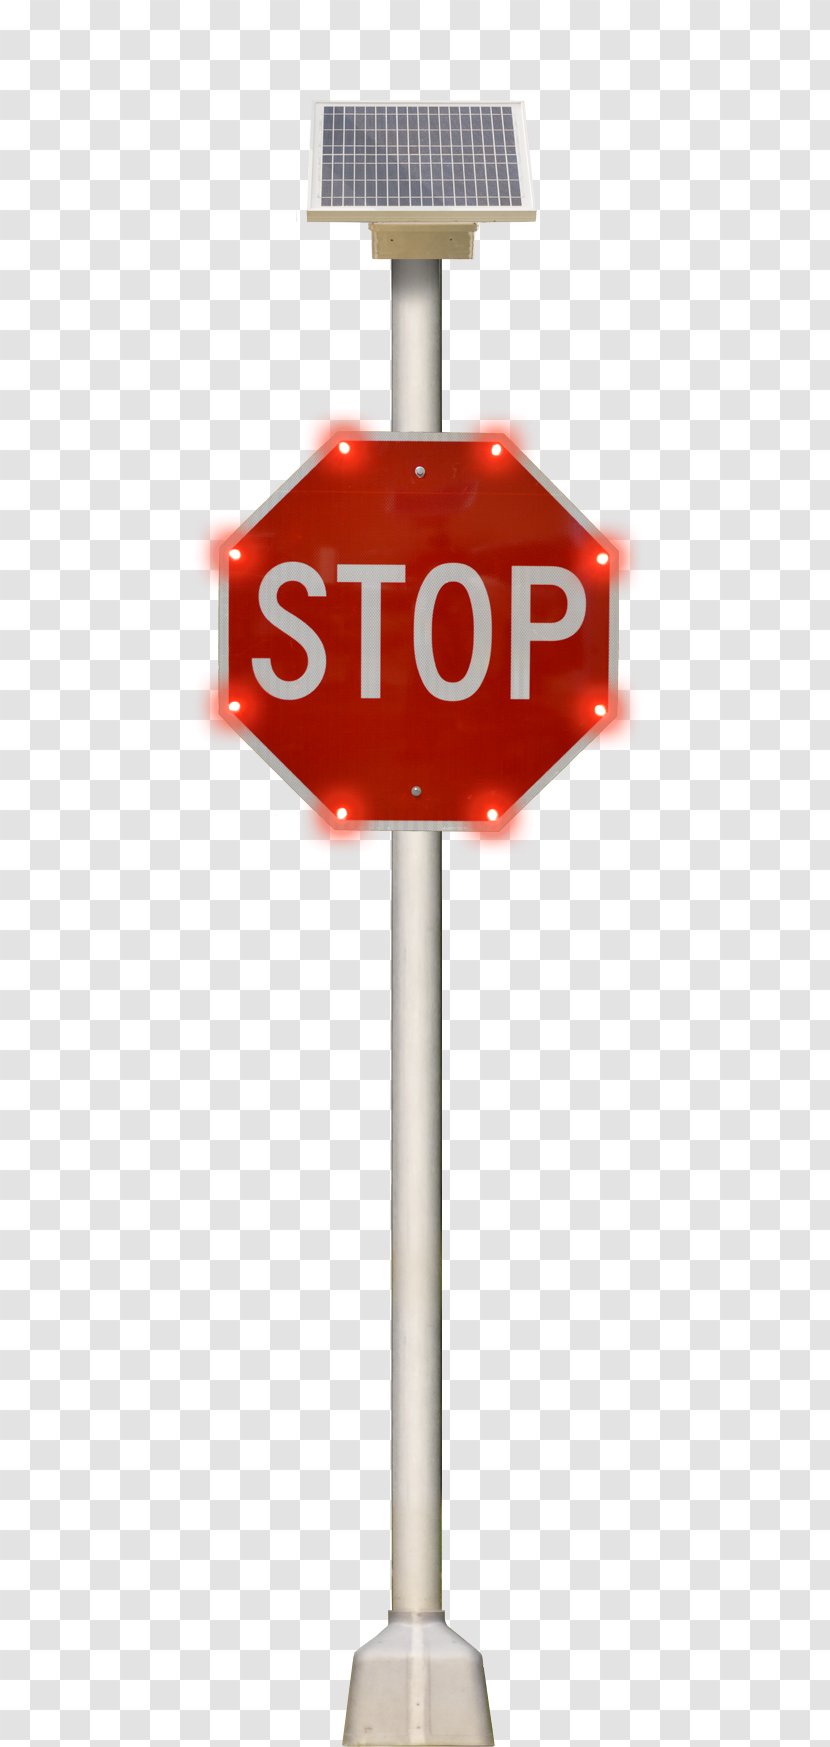 Stop Sign Road Warning Pedestrian Crossing Beacon - Traffic Transparent PNG